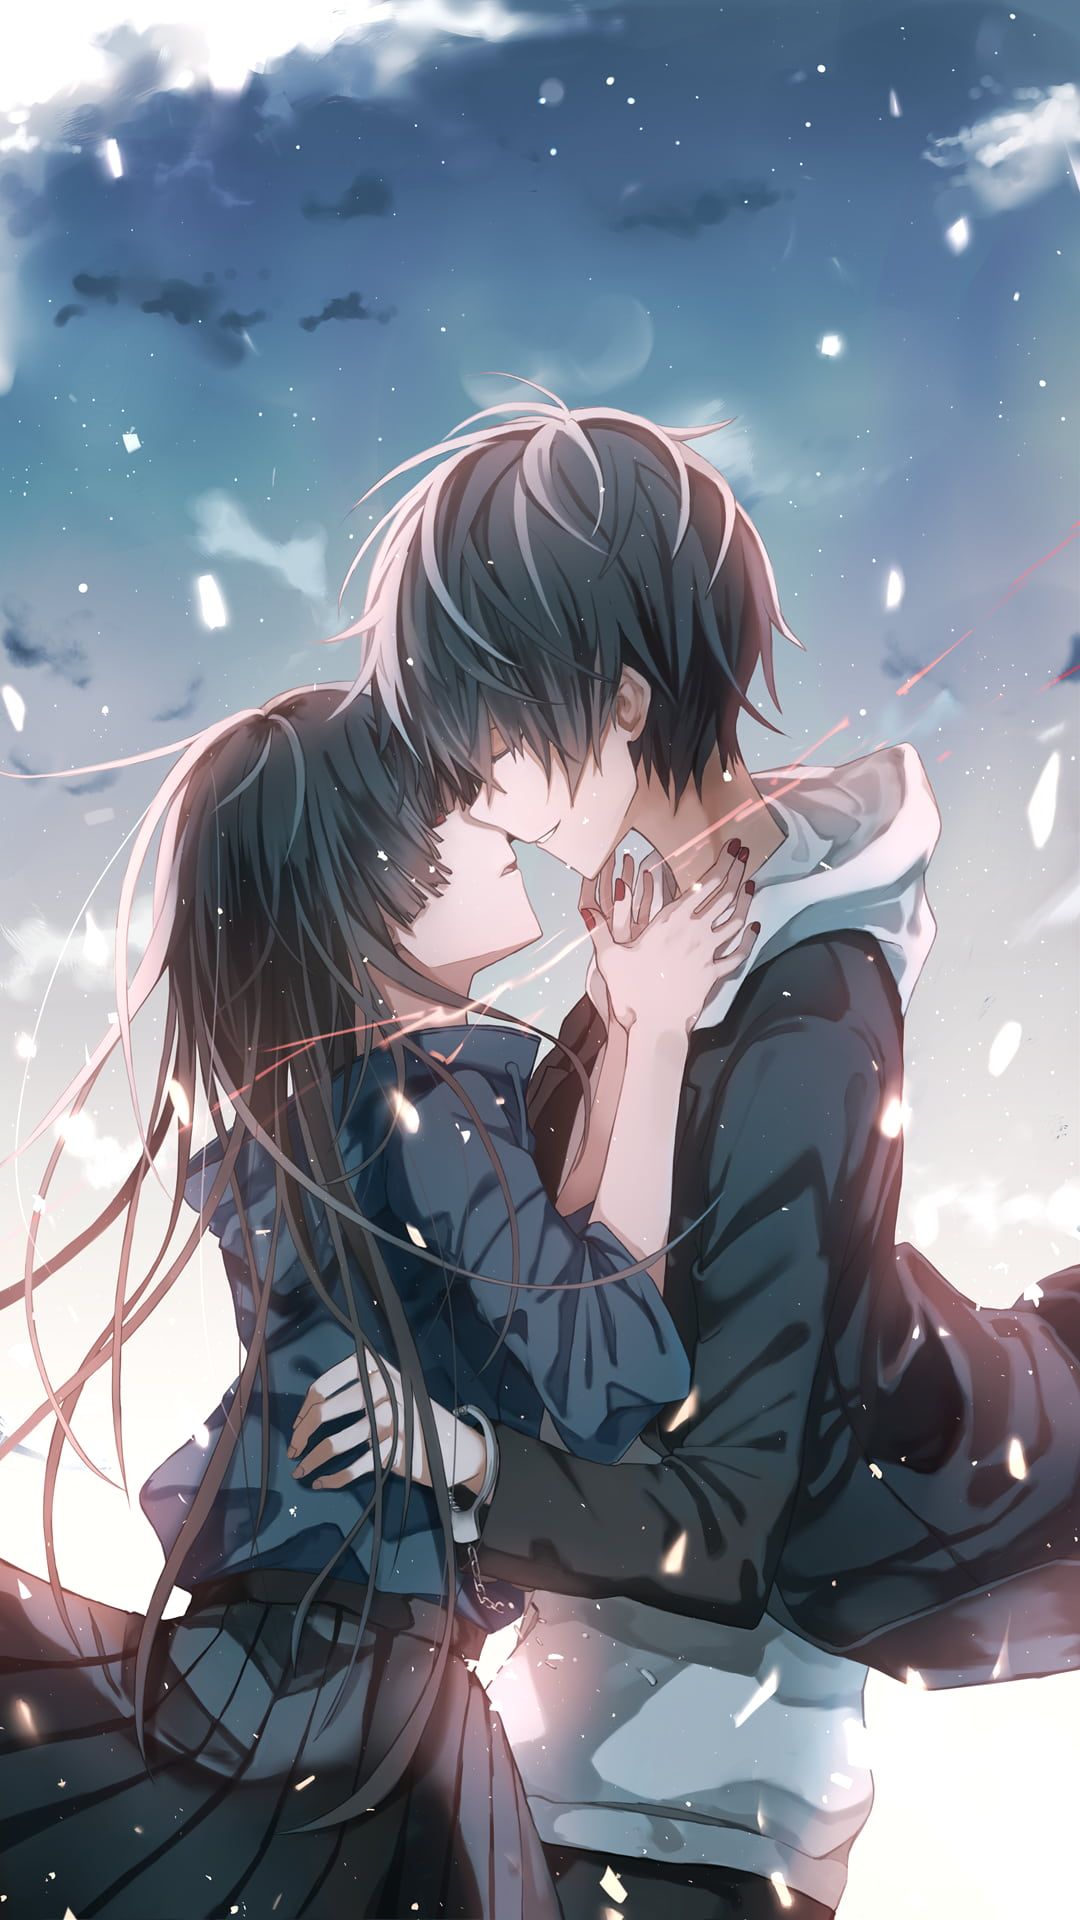 Anime Couple Wallpapers   Top Best Anime Couple Wallpapers